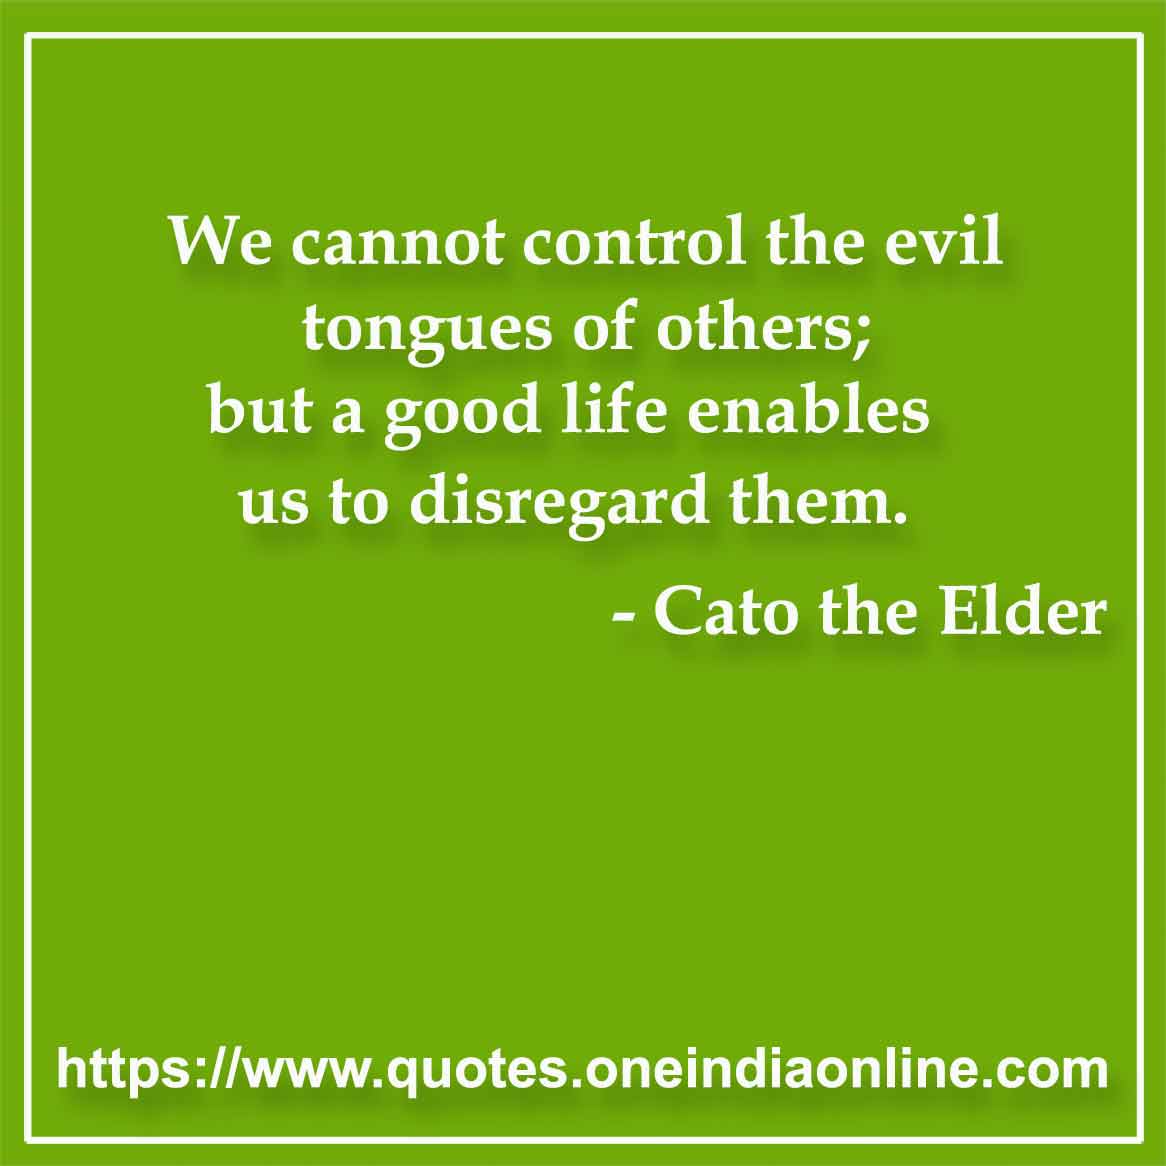 We cannot control the evil tongues of others; but a good life enables us to disregard them.

- Gossip Quotes by Cato the Elder